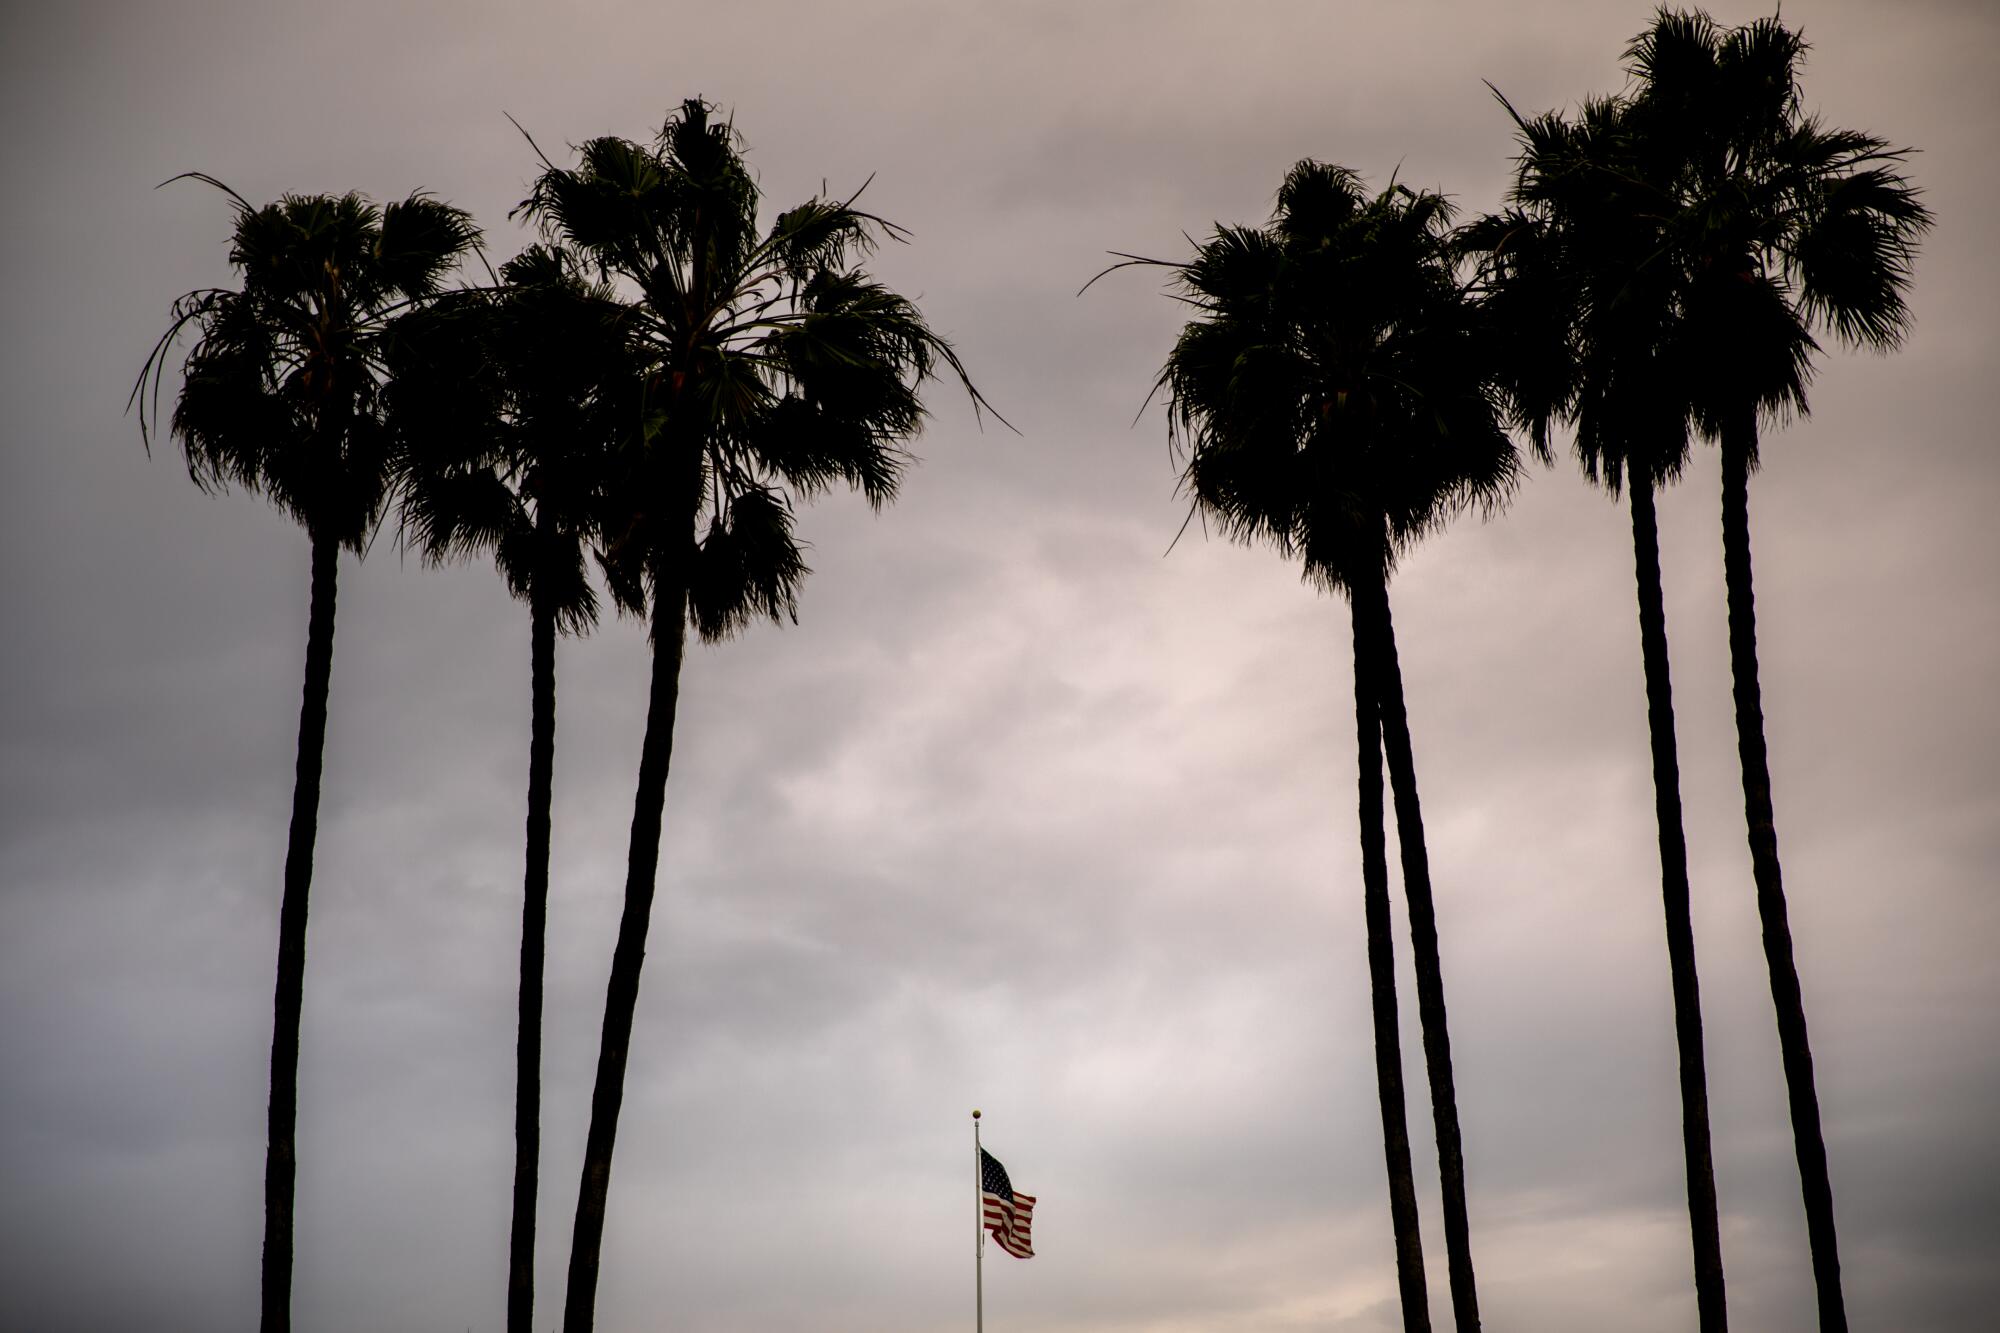 At Fort Rosecrans National Cemetery, two sets of palm trees stand divided